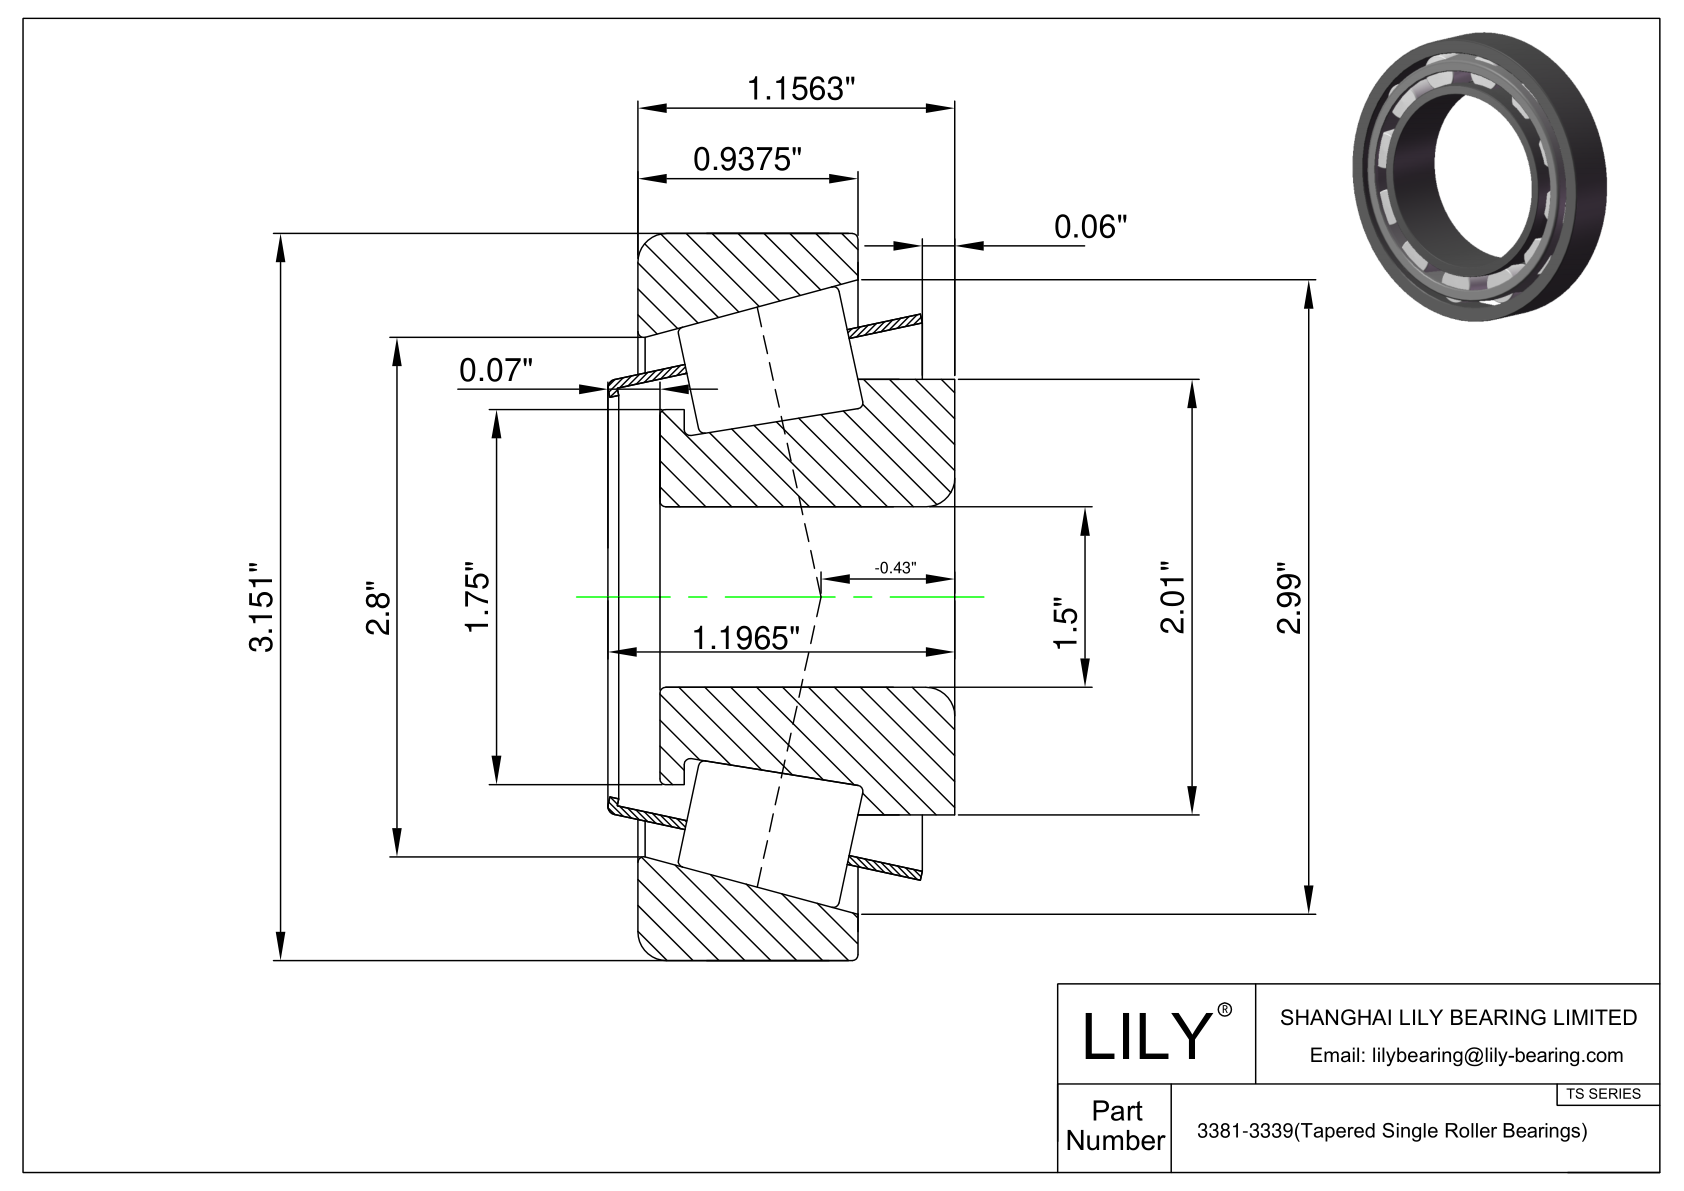 3381-3339 TS (Tapered Single Roller Bearings) (Imperial) cad drawing